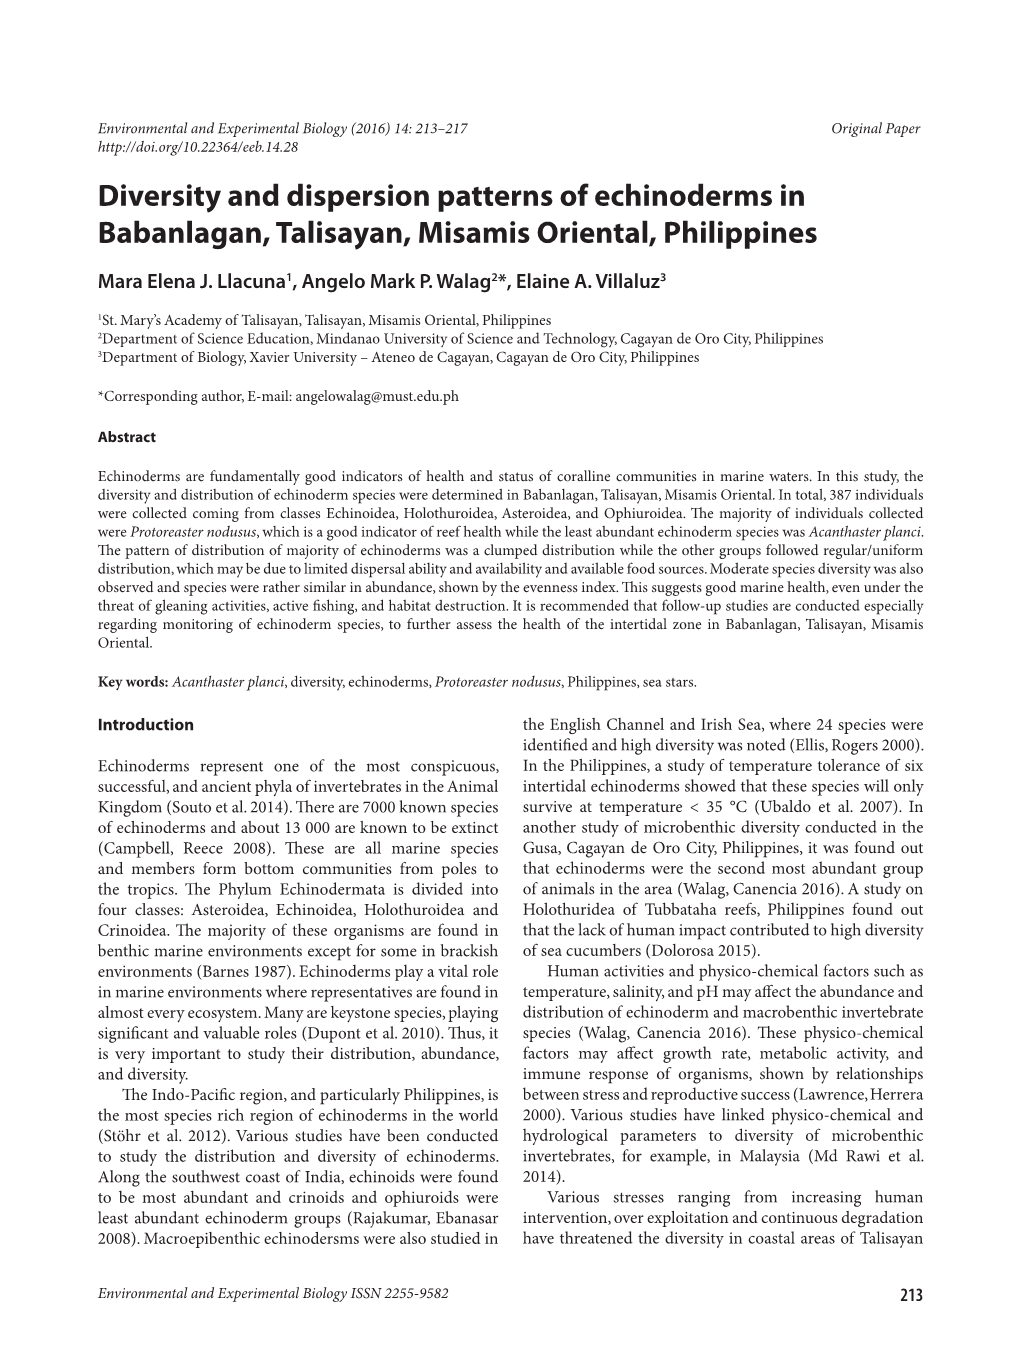 Diversity and Dispersion Patterns of Echinoderms in Babanlagan, Talisayan, Misamis Oriental, Philippines